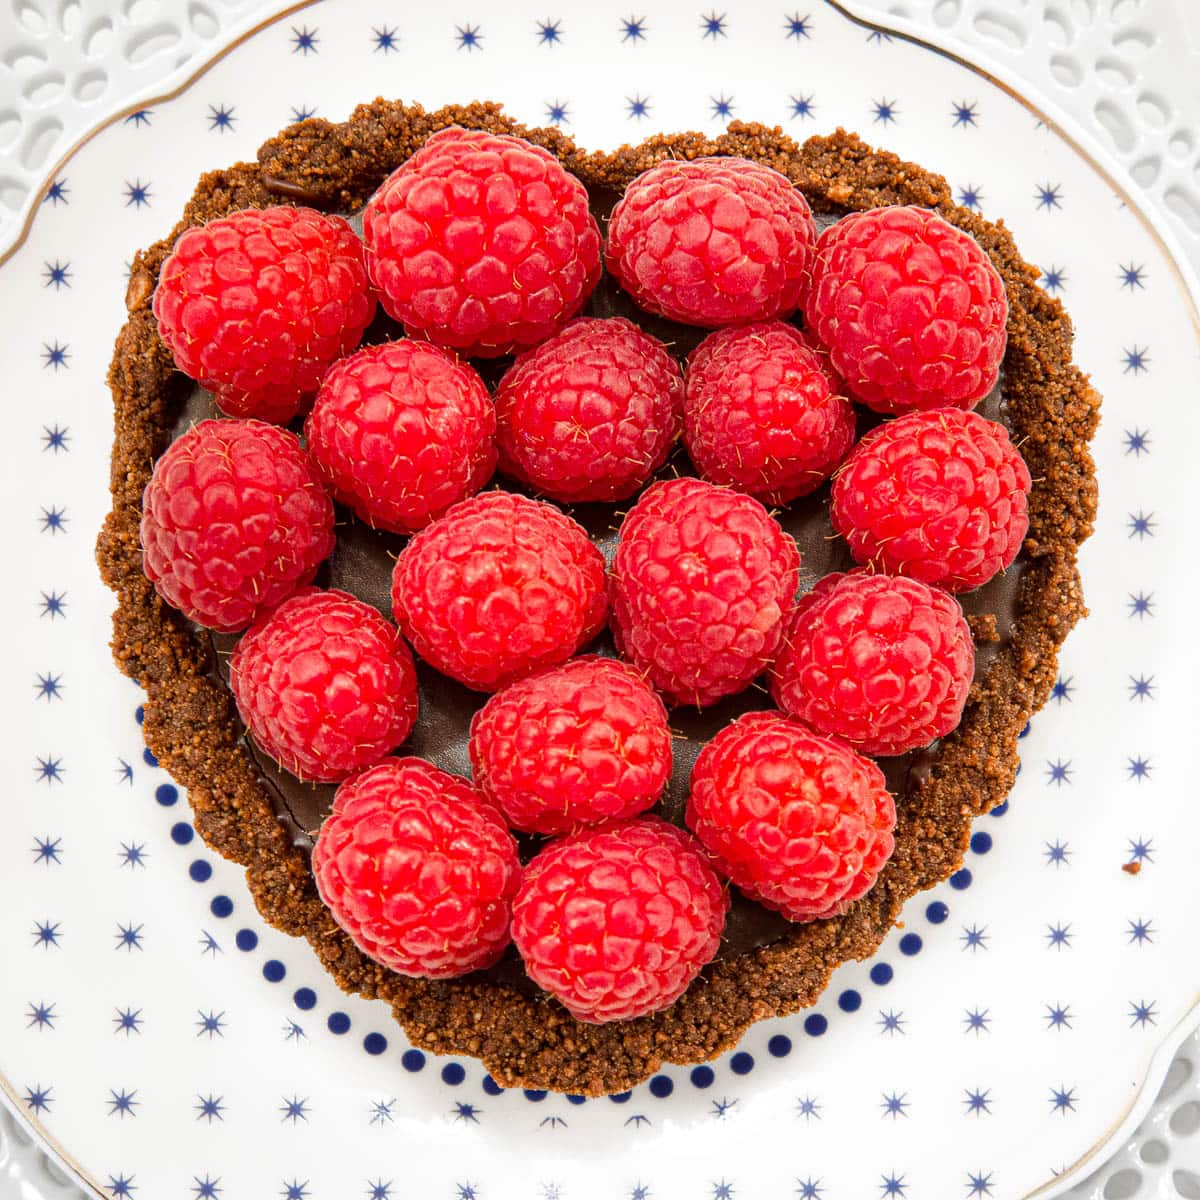 A heart shaped tart filled with truffle filling and topped with fresh raspberries on a white plate with blue dots.